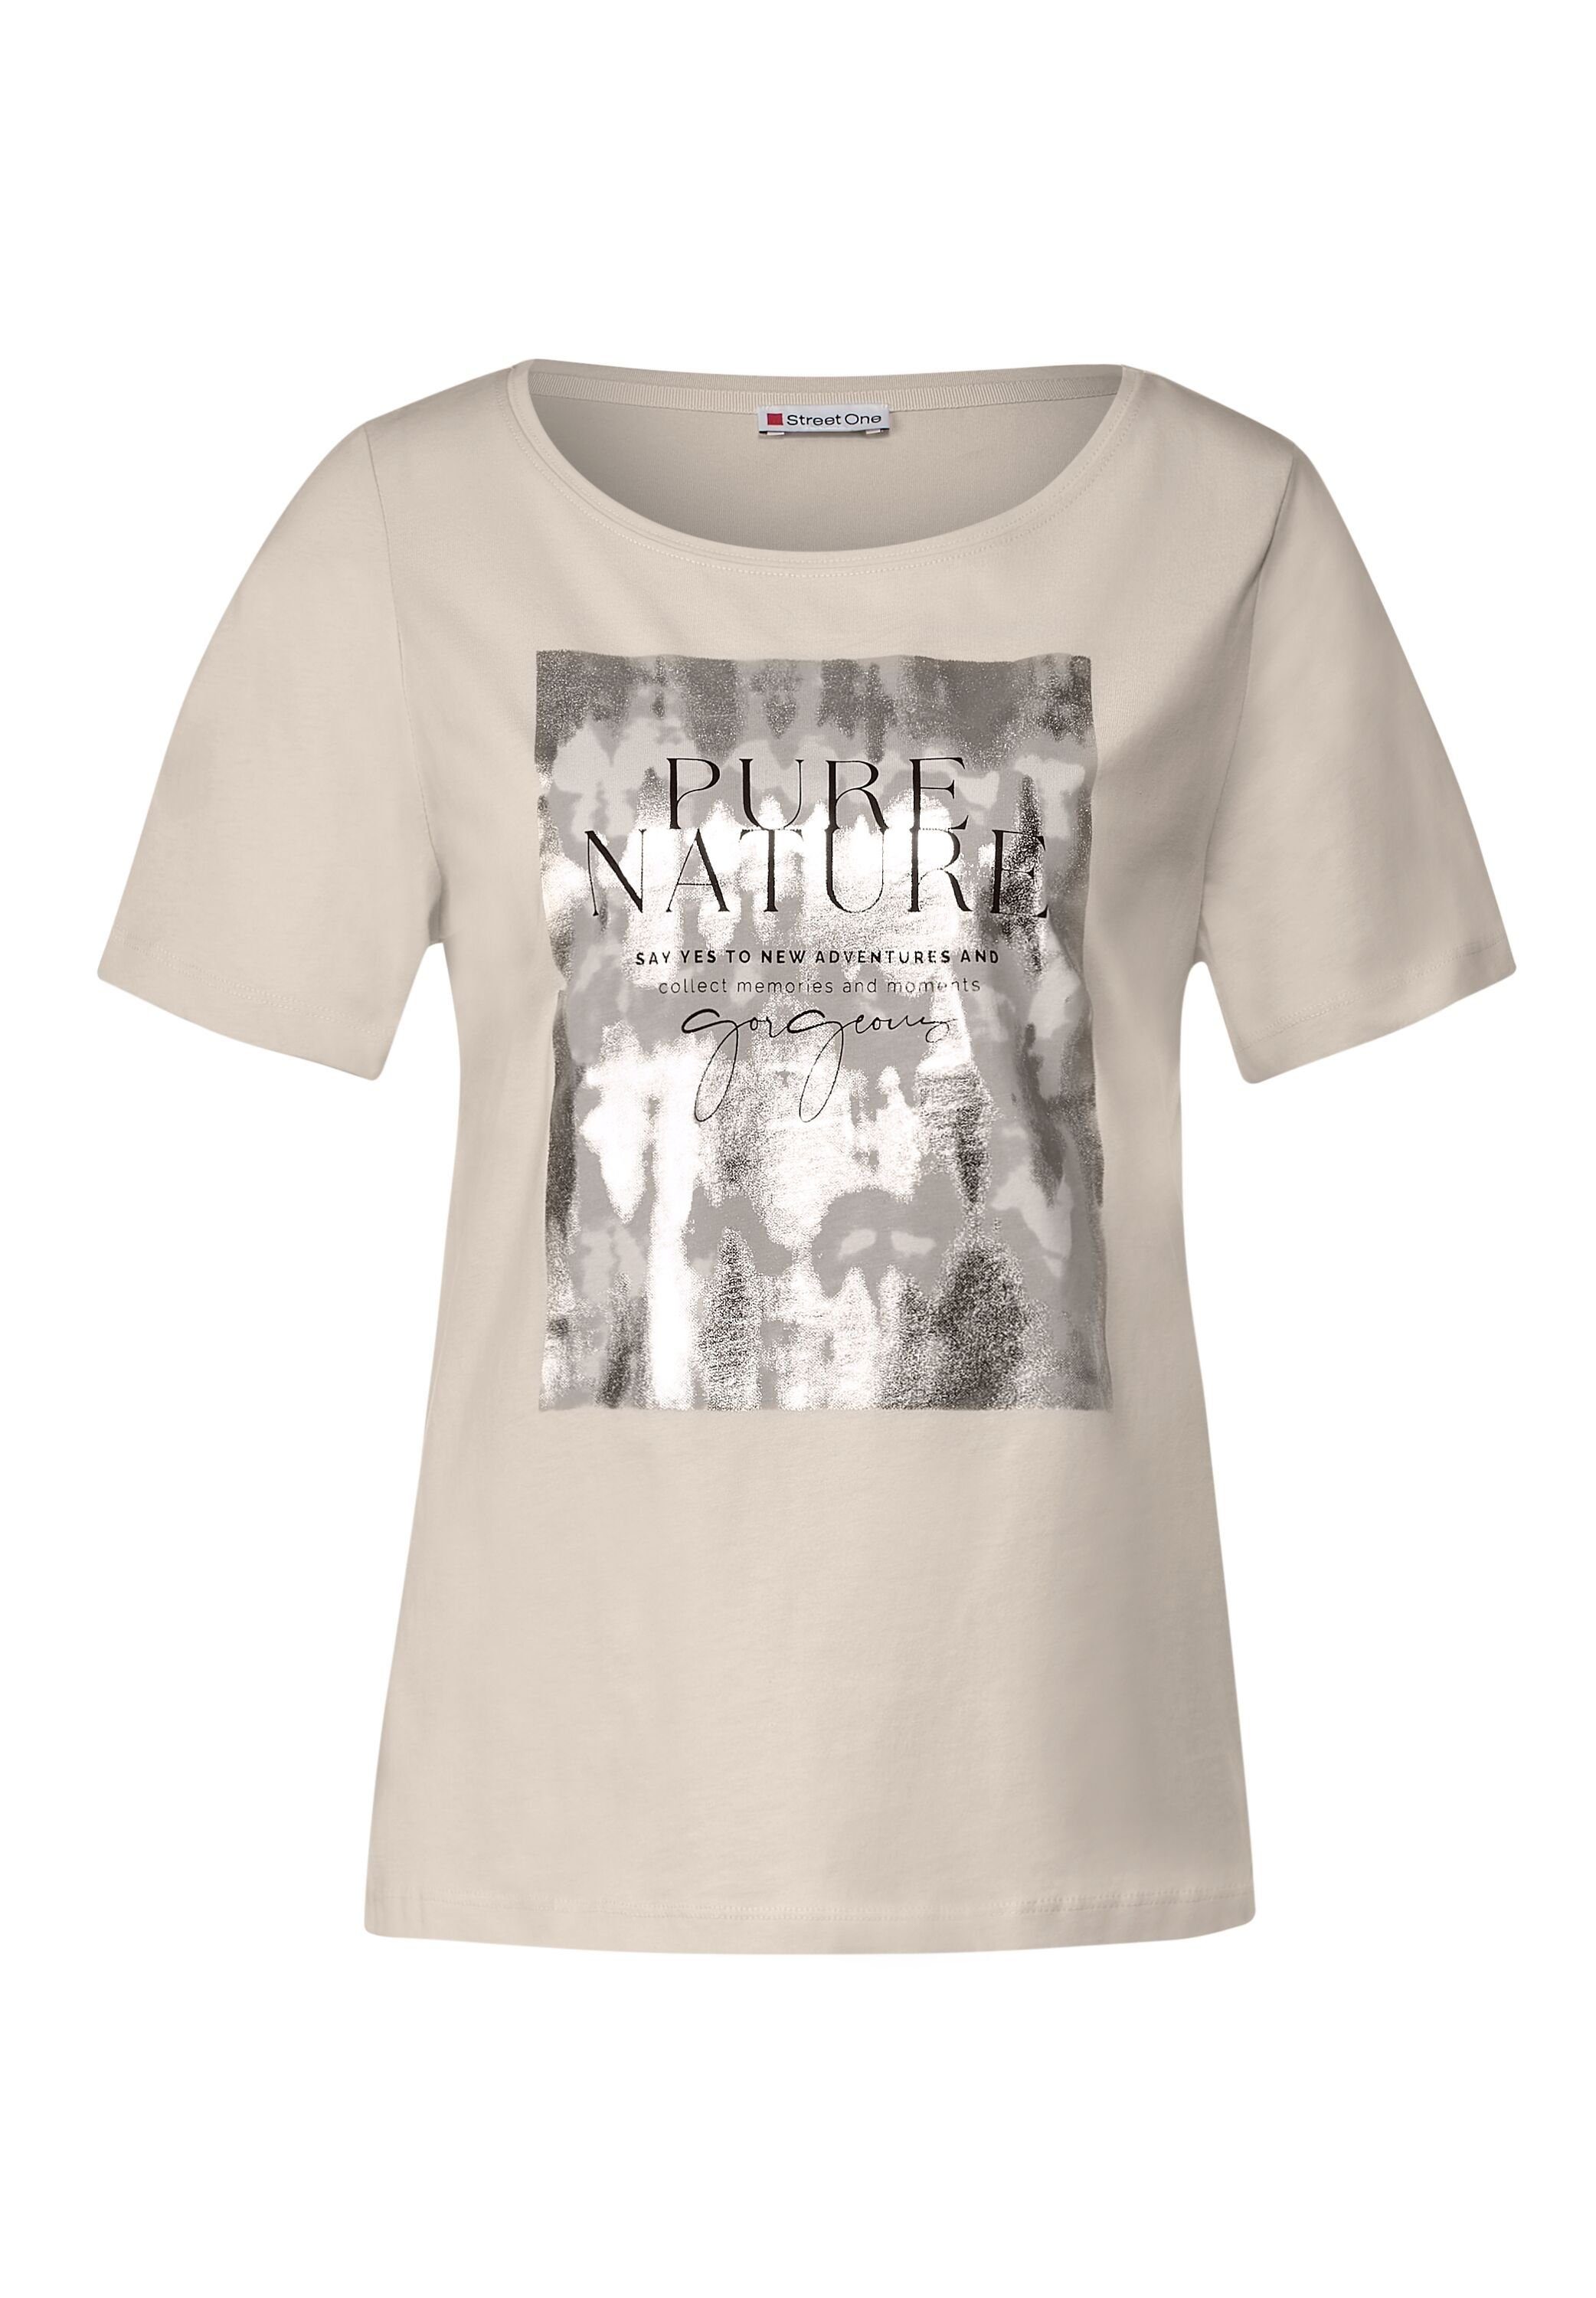 T-Shirt smooth stone STREET ONE sand